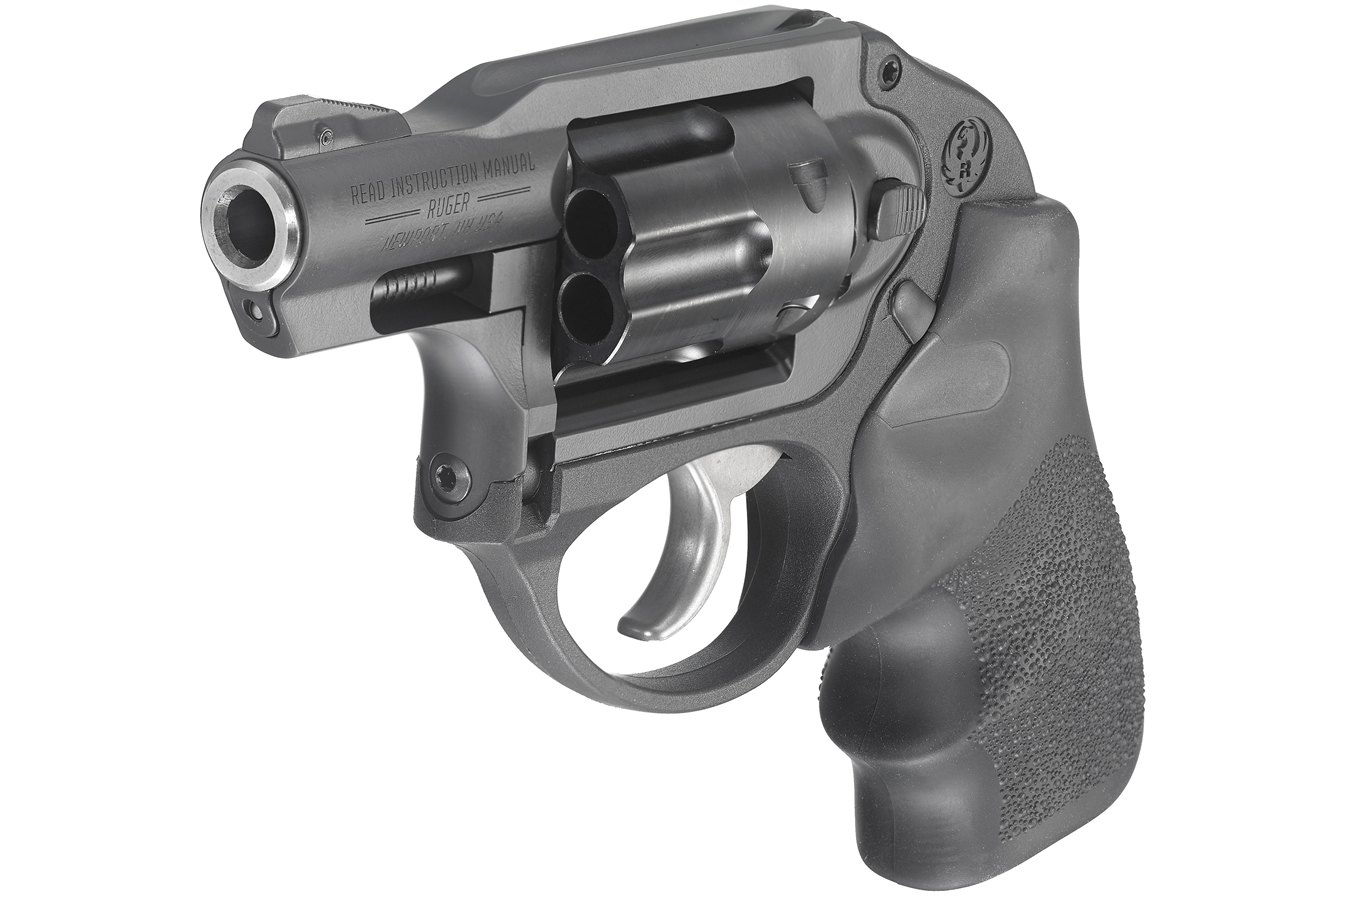 Ruger LCR 327 Federal Magnum Double Action Revolver Sportsman s 